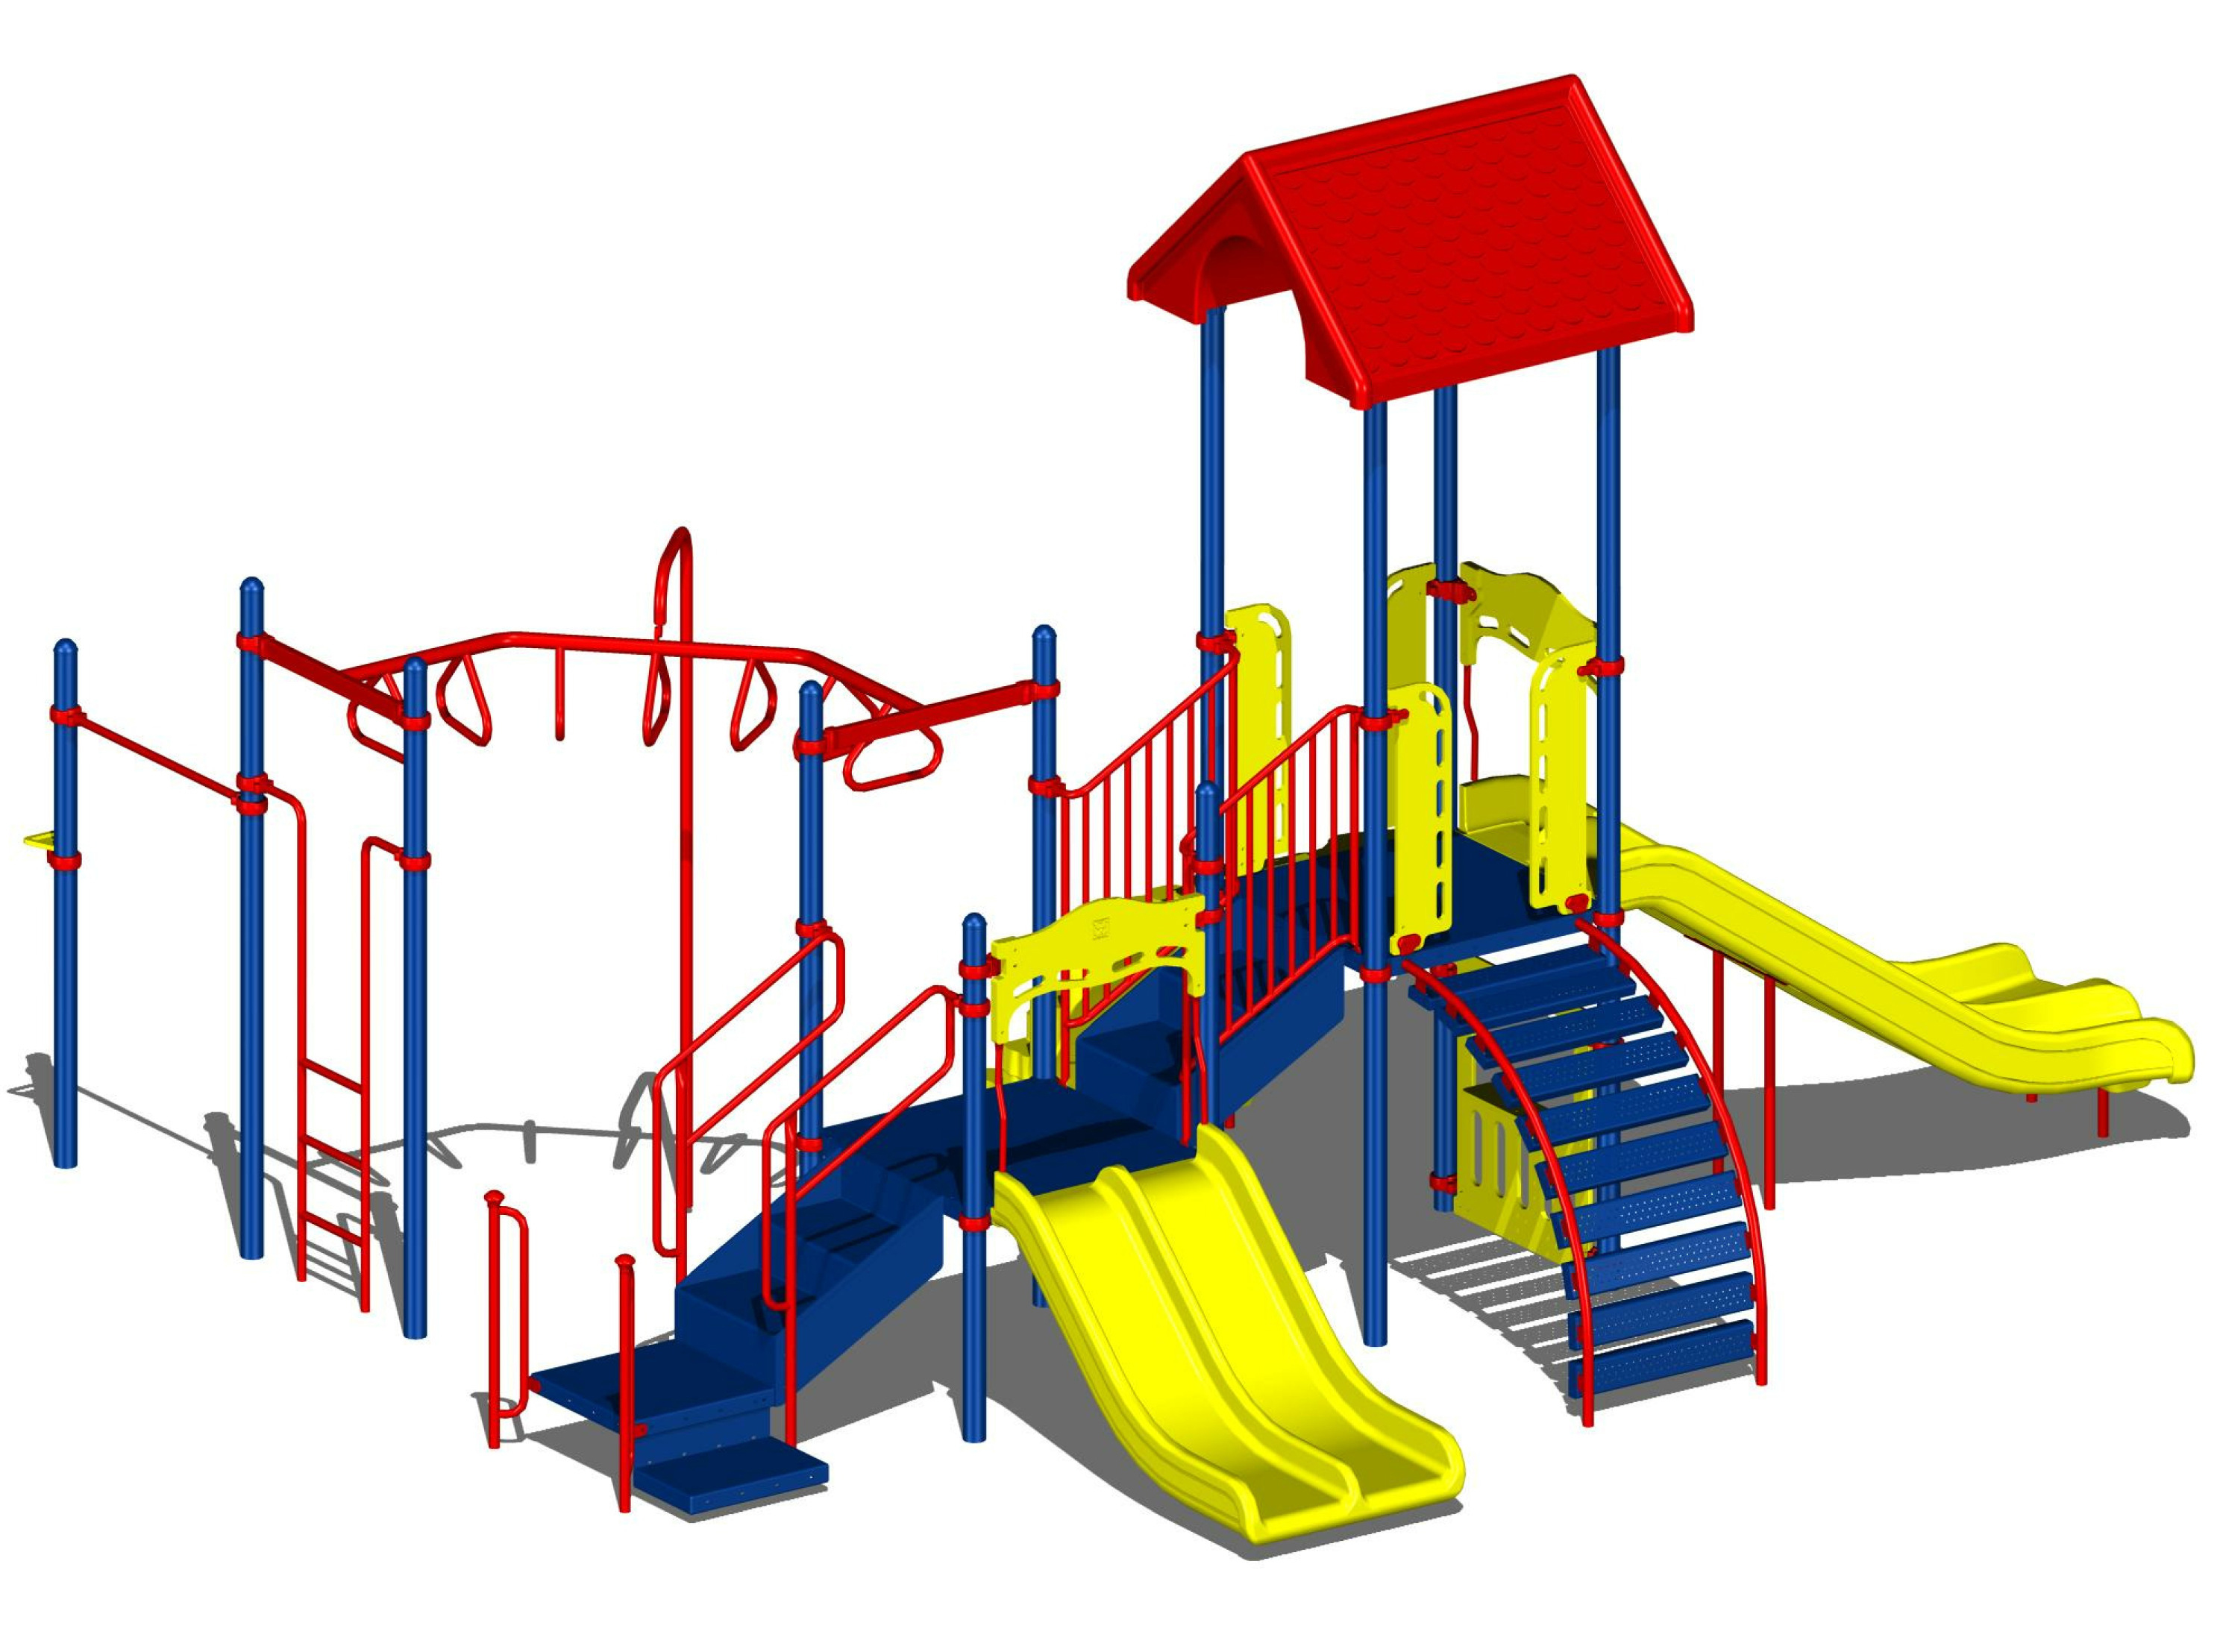 Playground Equipment | Clipart library - Free Clipart Images